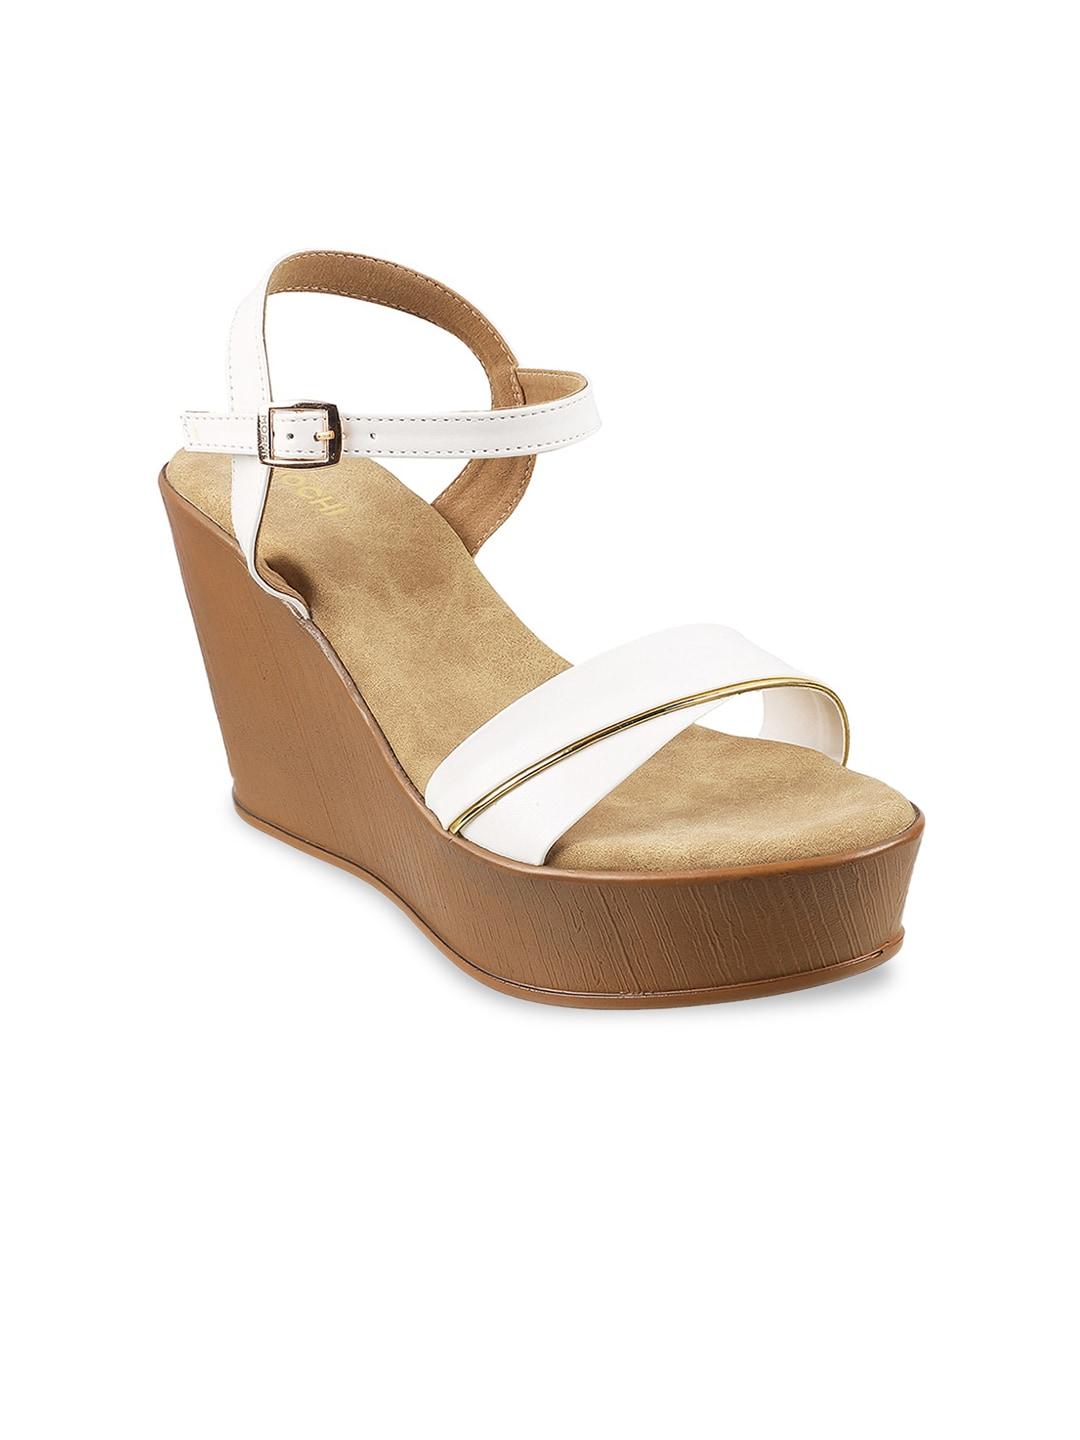 Mochi White Wedge Sandals with Buckles